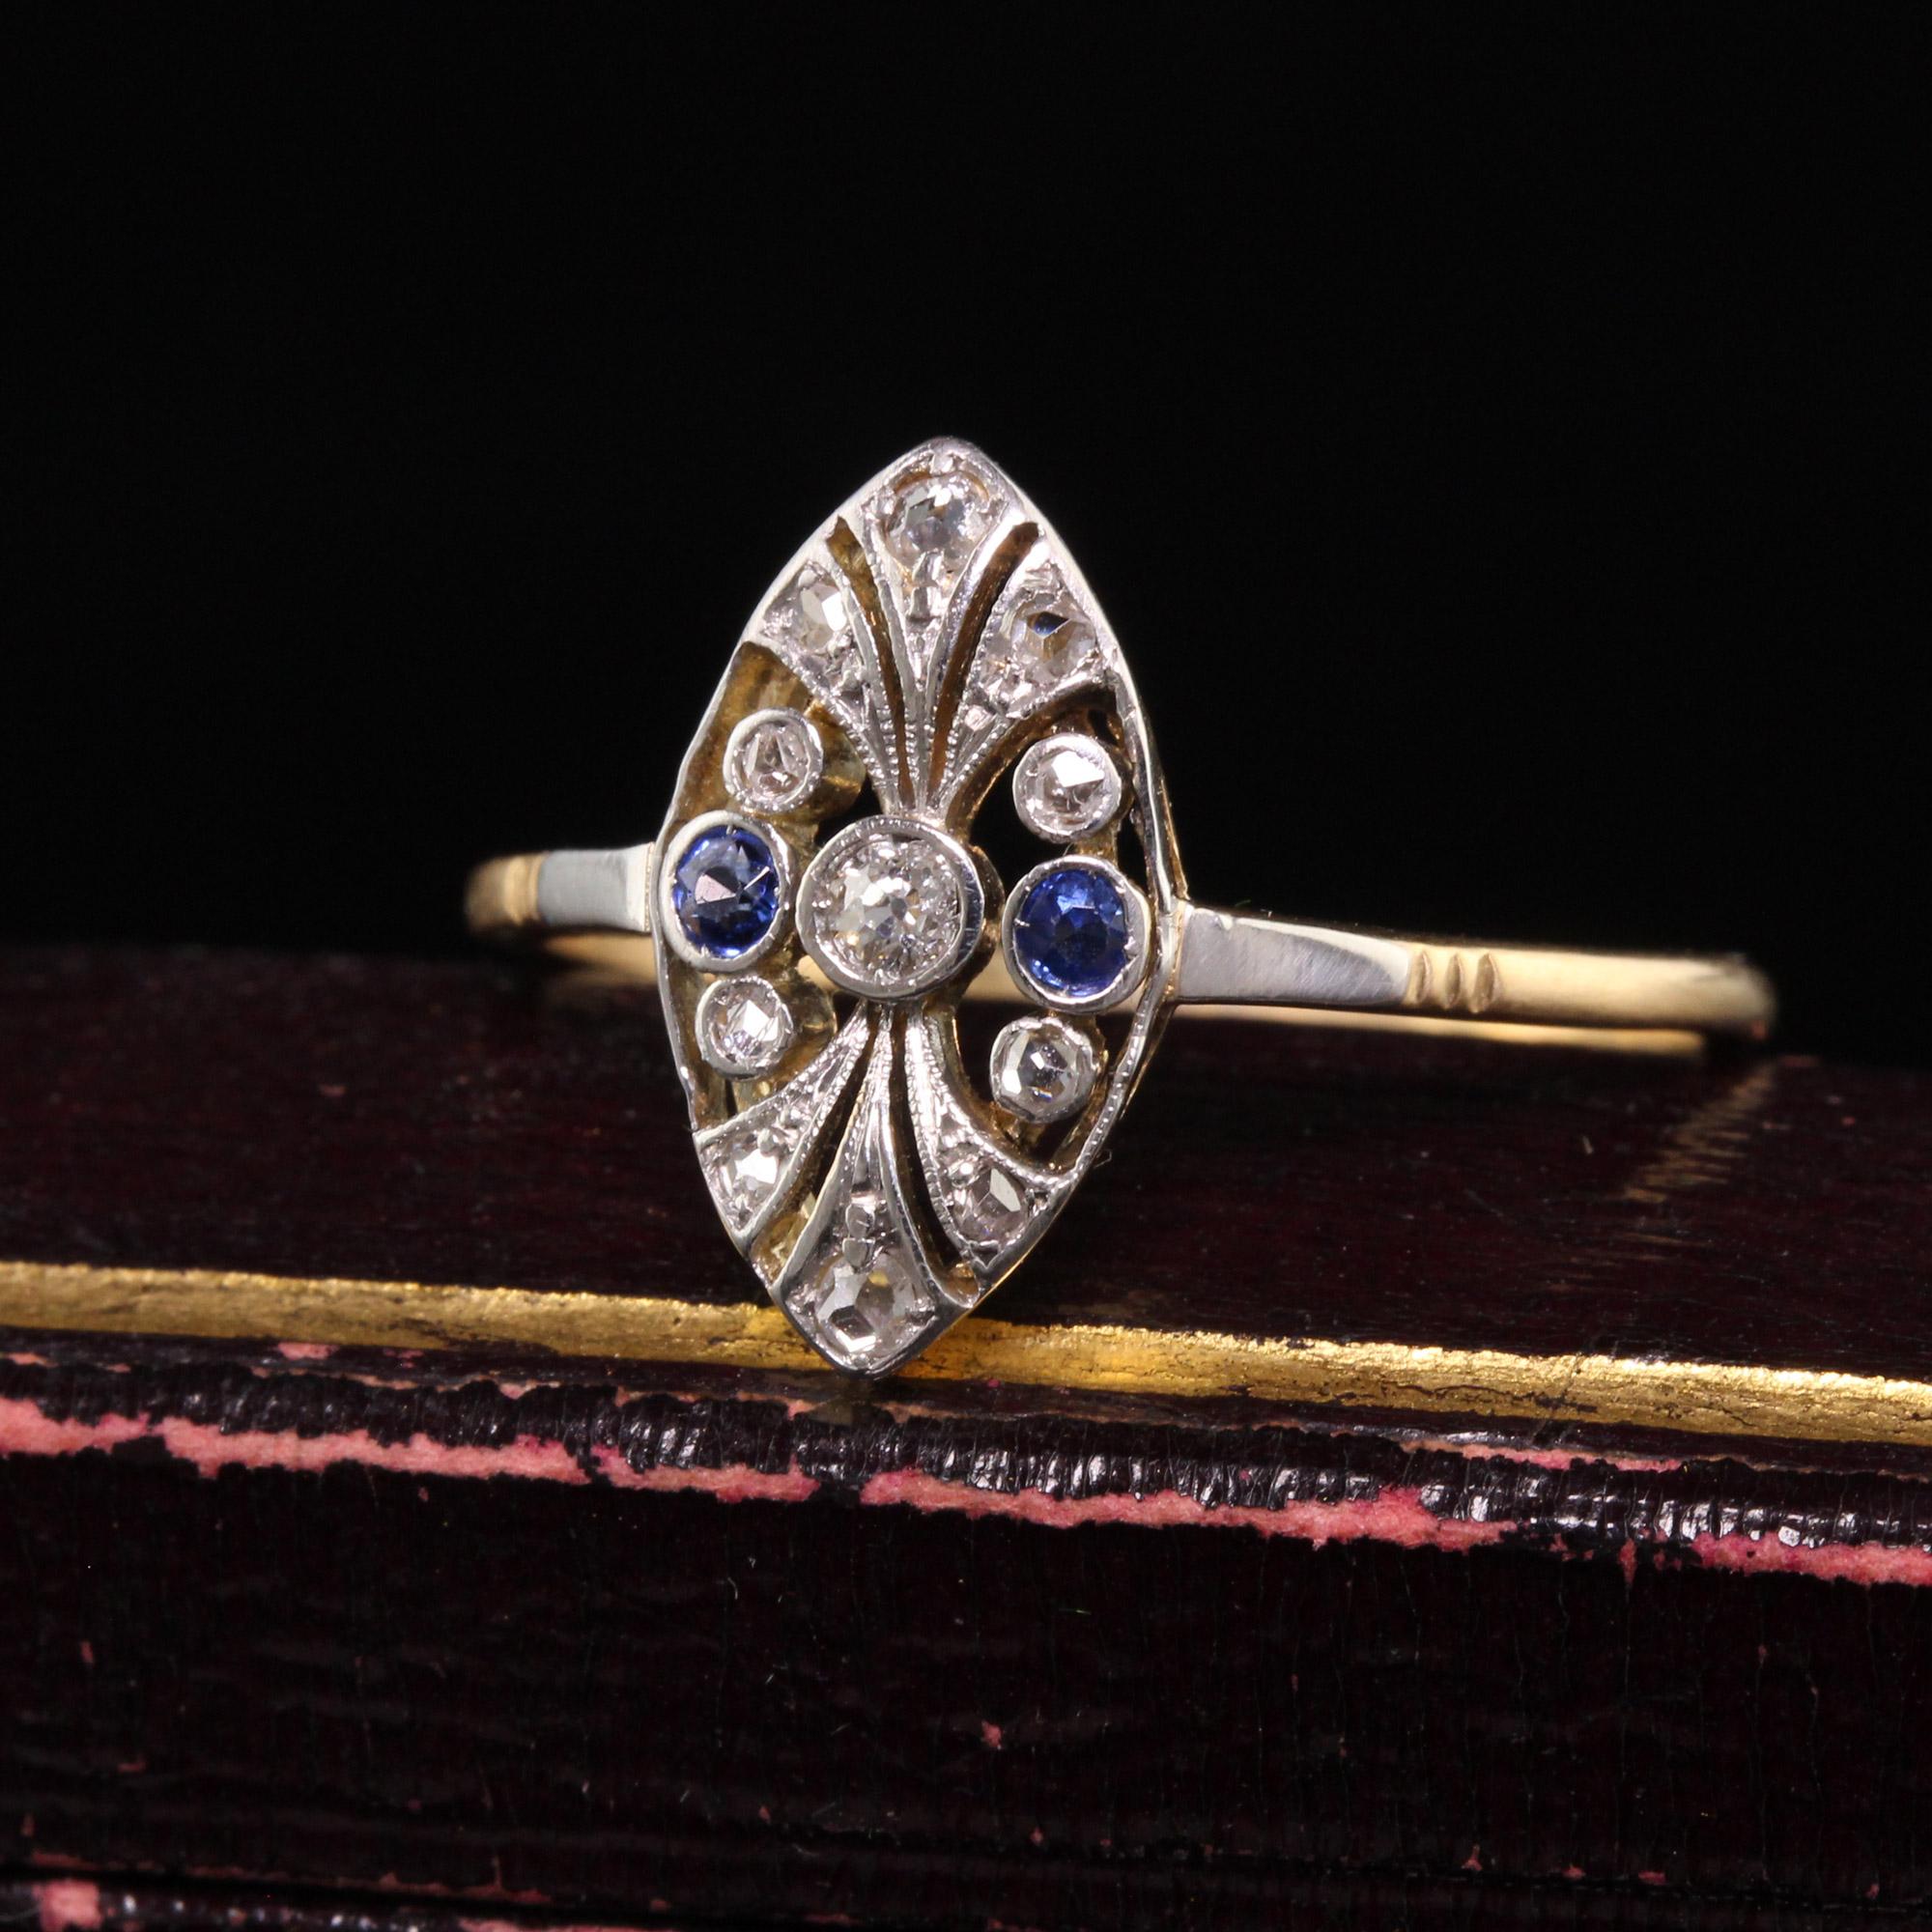 Beautiful Antique Edwardian 18K Yellow Gold and Platinum Diamond Sapphire Ring. This pretty Edwardian ring is crafted in 18k yellow gold and platinum top. It has rose cut diamonds and round natural sapphires set on top.

Item #R1311

Metal: 18K